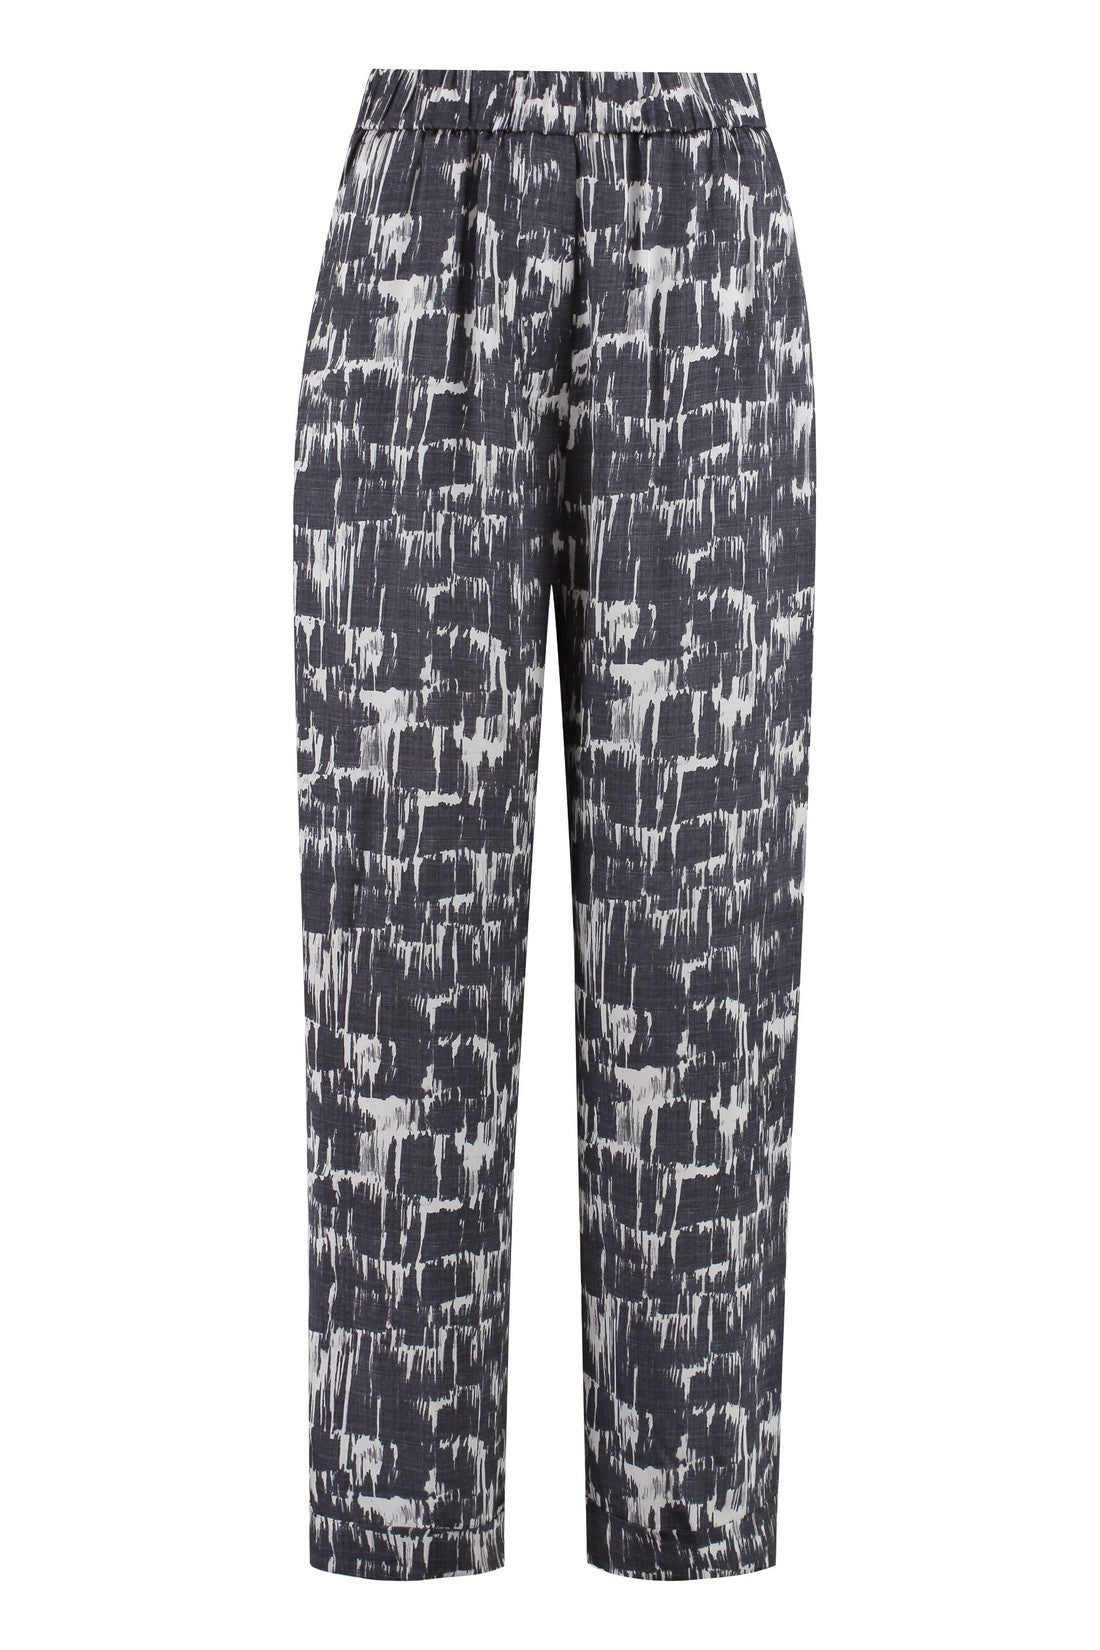 Peserico-OUTLET-SALE-Printed satin trousers-ARCHIVIST